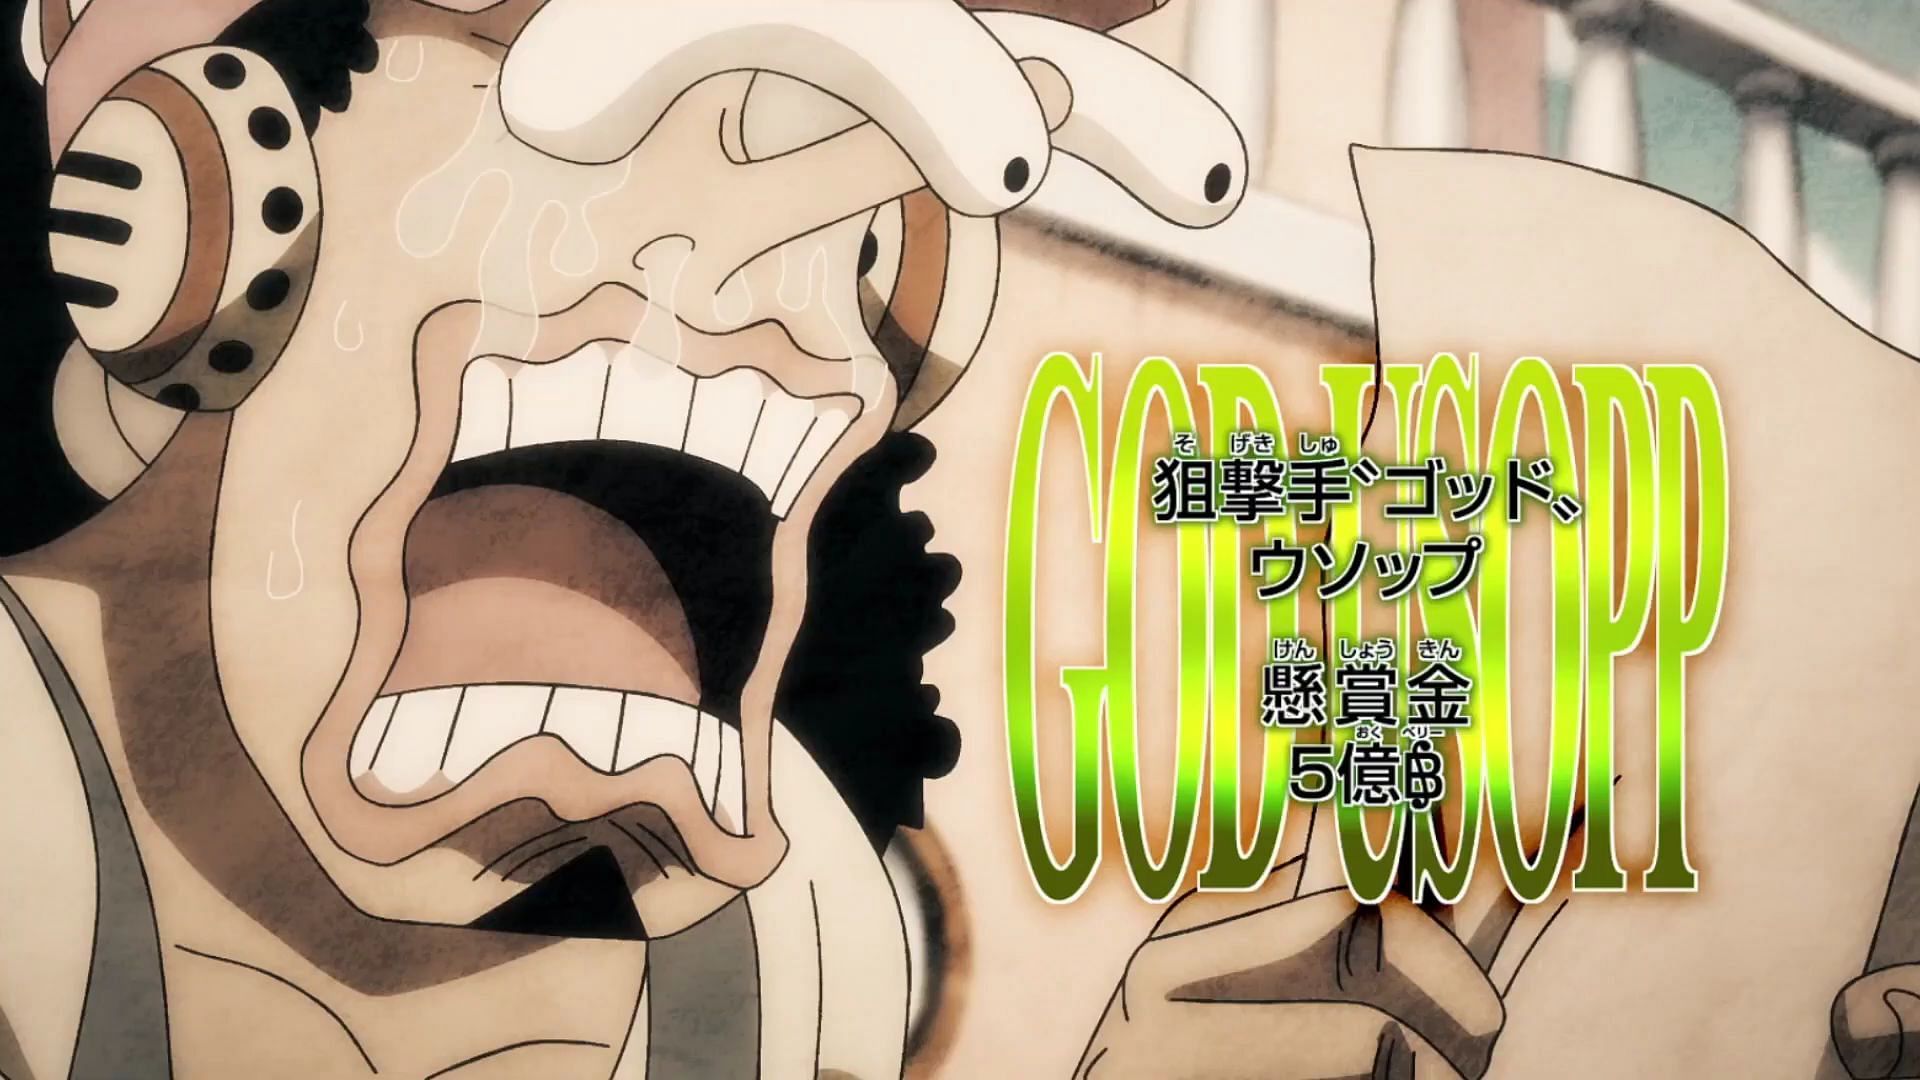 One Piece episode 1086: 5 Straw Hat Pirates new bounties that make